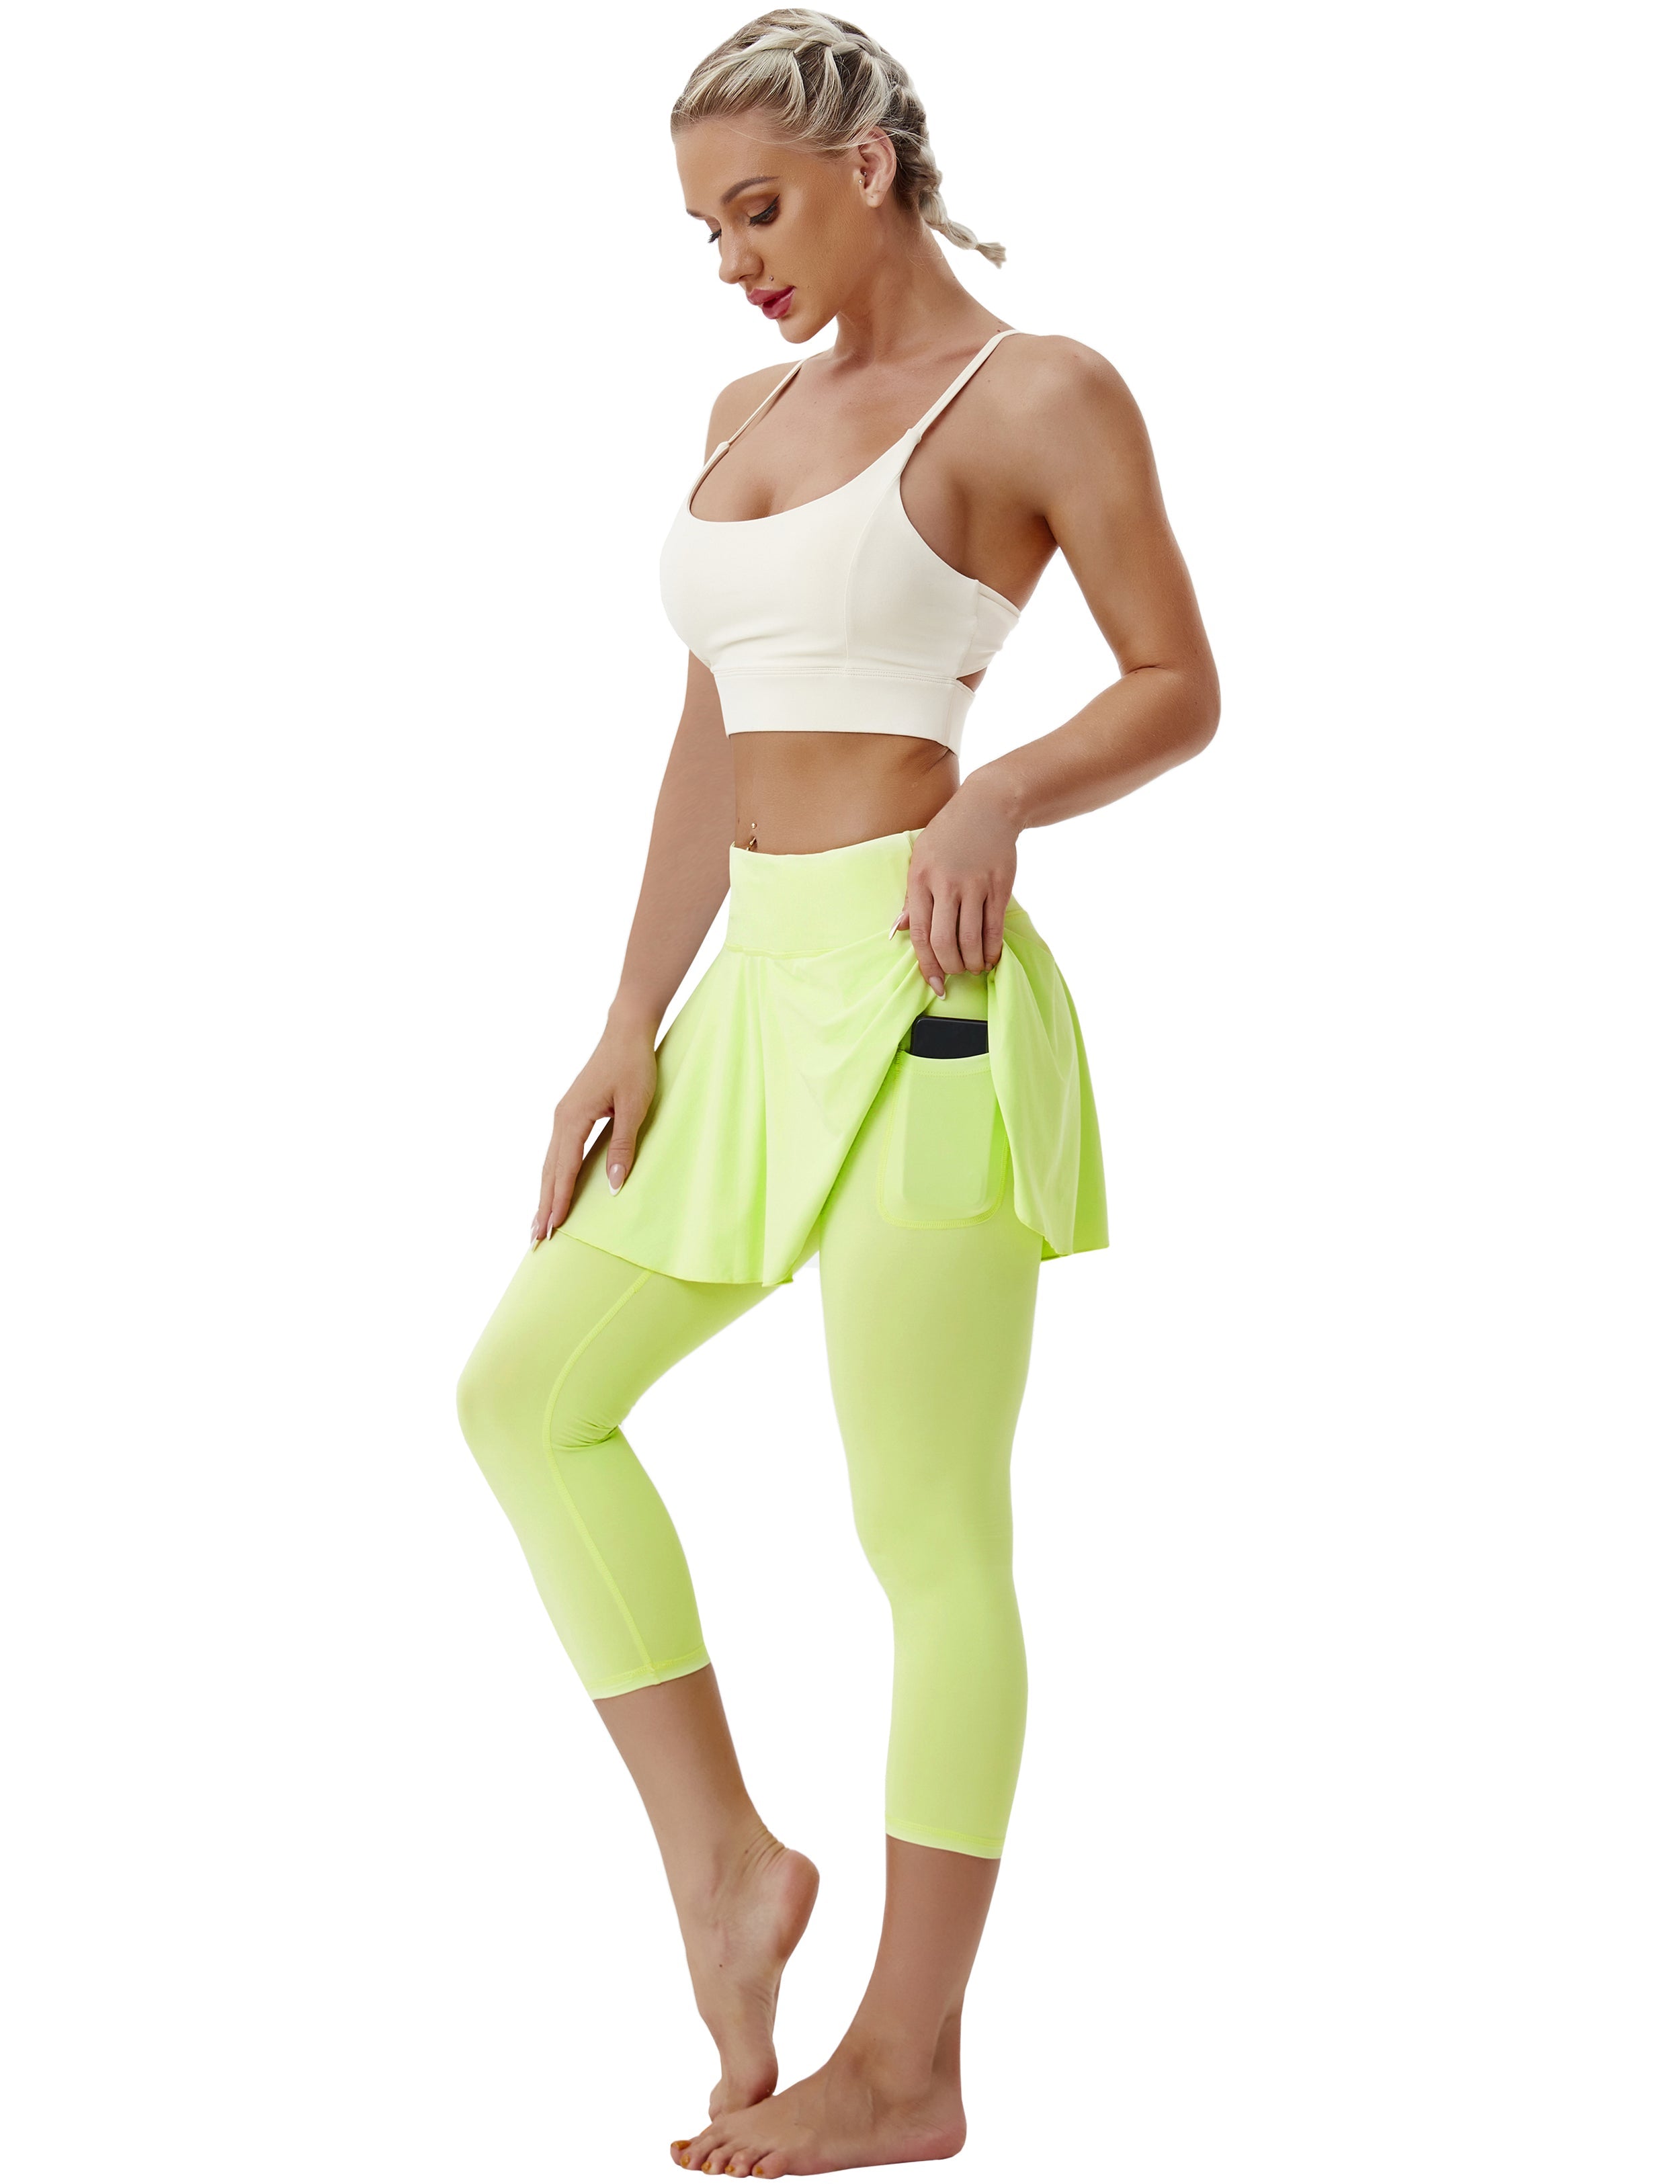 19" Capris Tennis Golf Skirted Leggings with Pockets neonyellow 80%Nylon/20%Spandex UPF 50+ sun protection Elastic closure Lightweight, Wrinkle Moisture wicking Quick drying Secure & comfortable two layer Hidden pocket